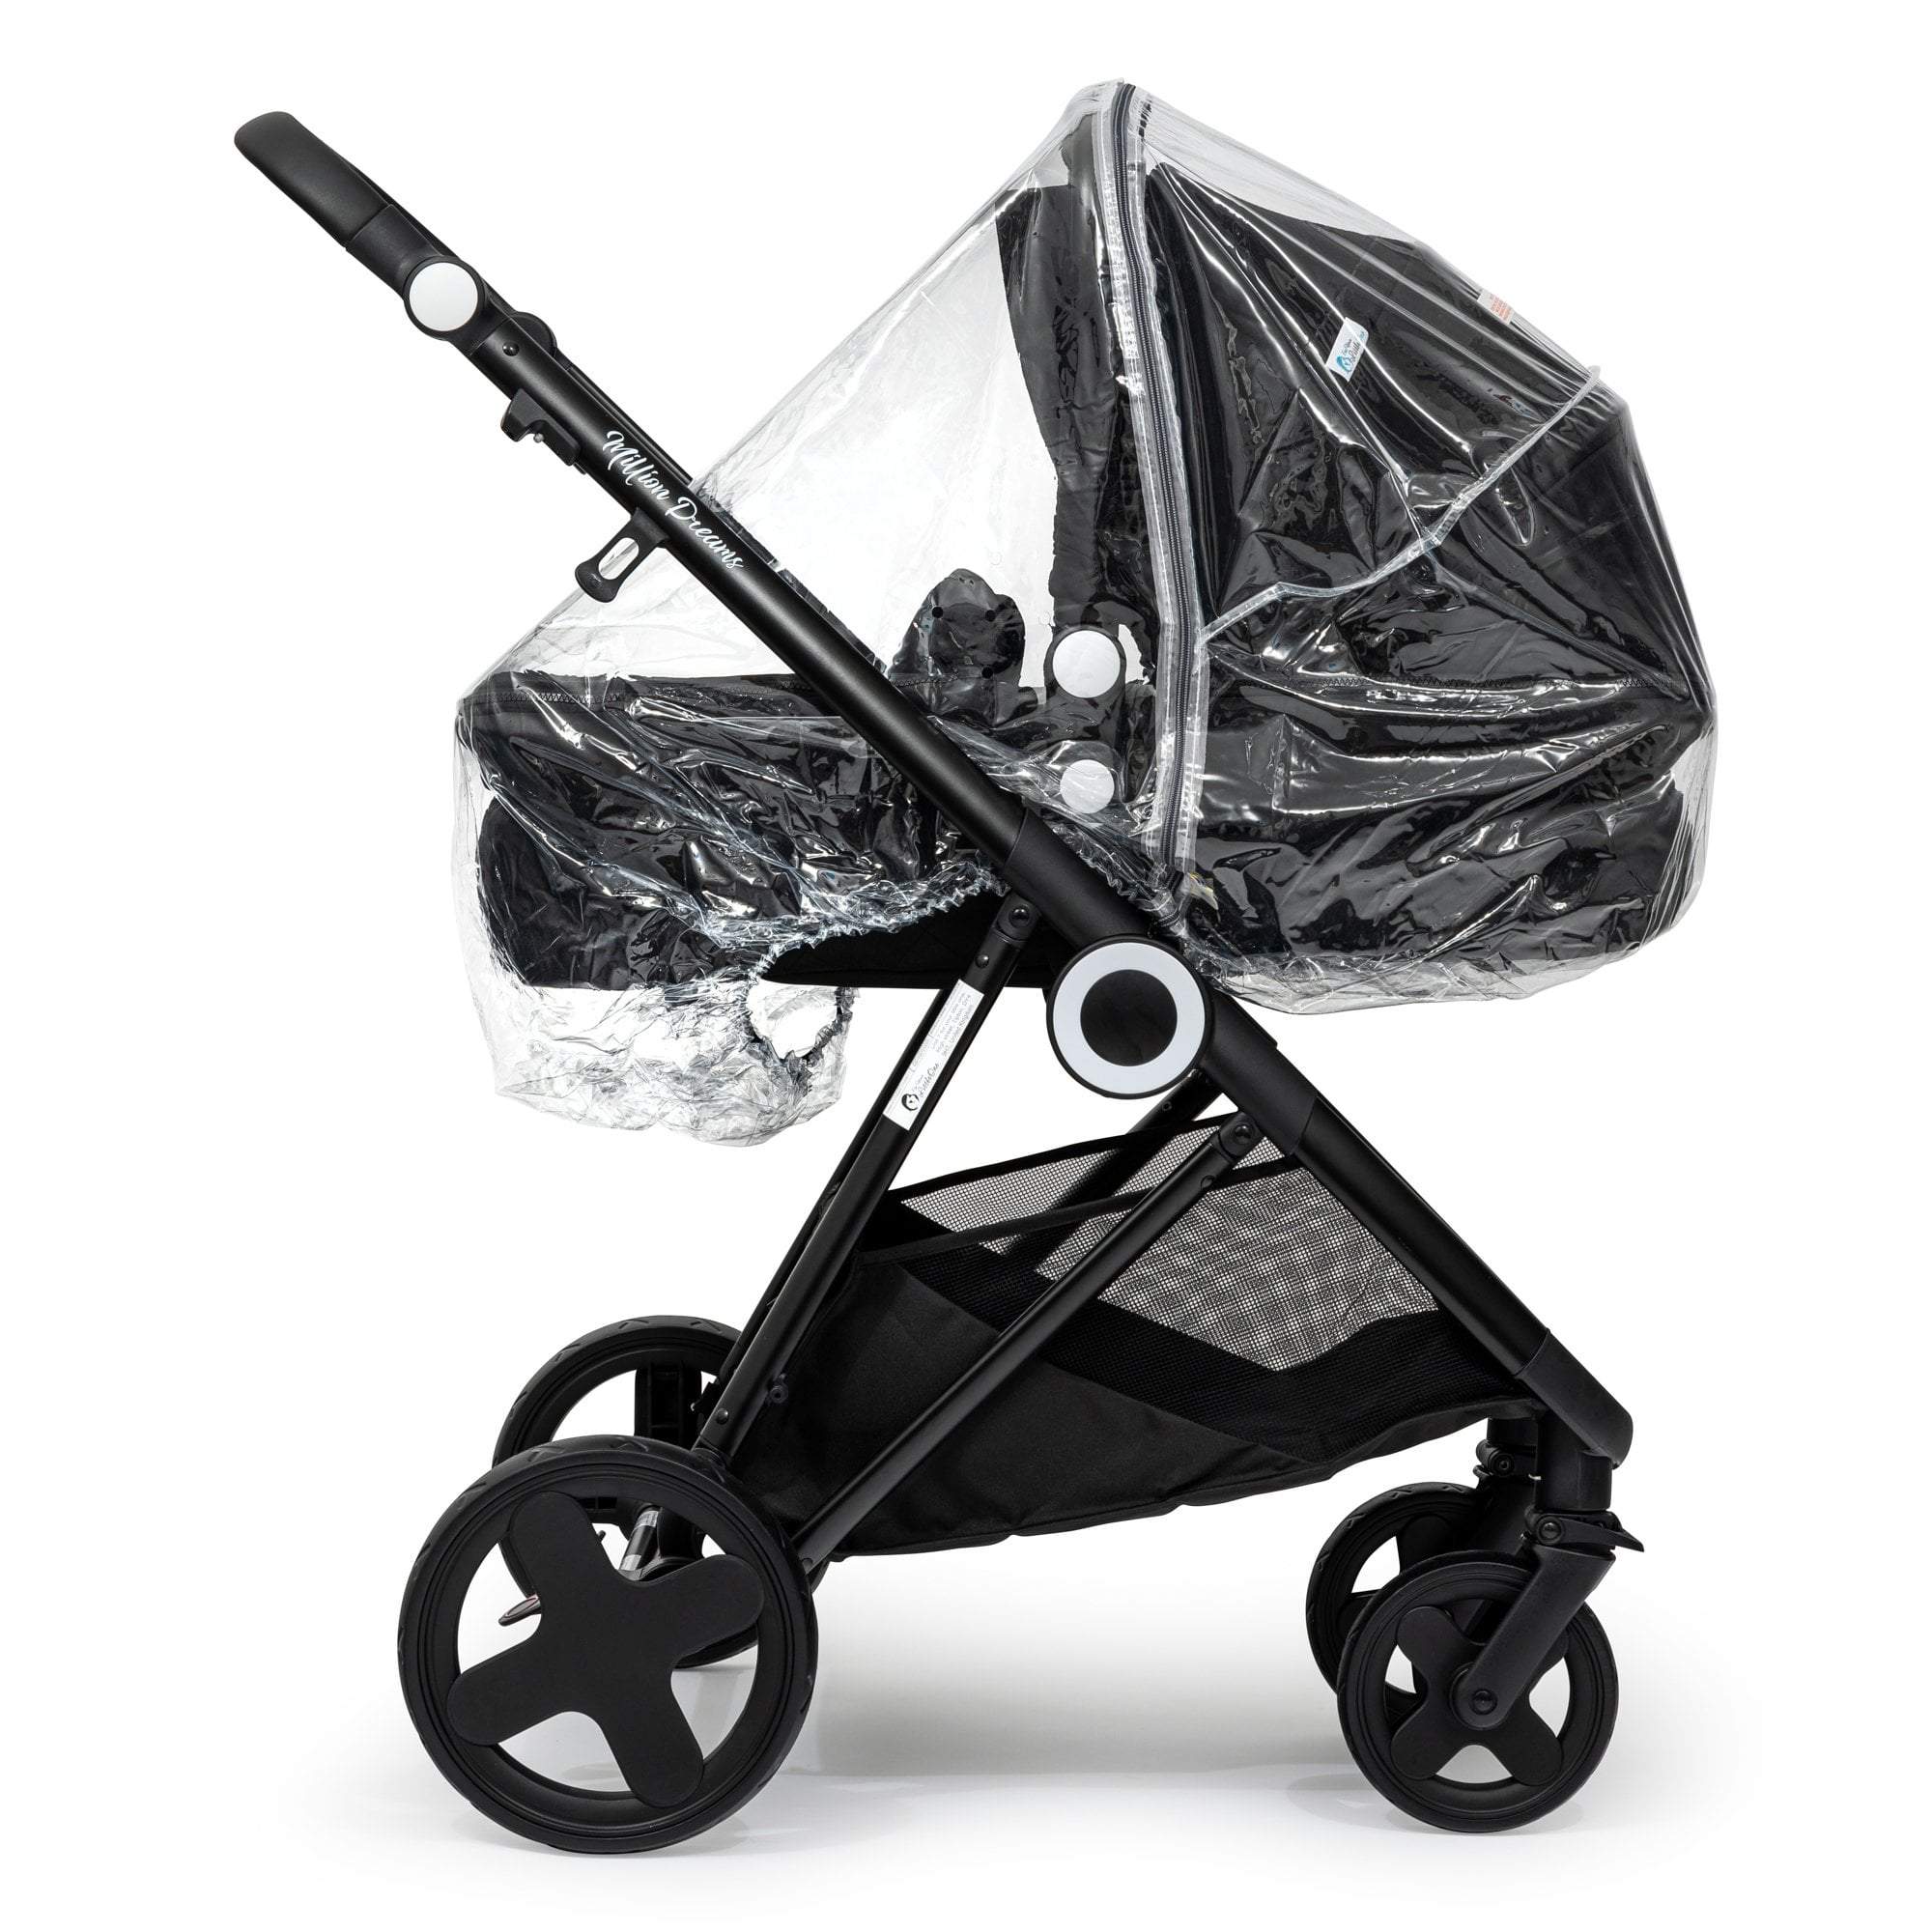 Carrycot Raincover Compatible With Casual - Fits All Models - For Your Little One